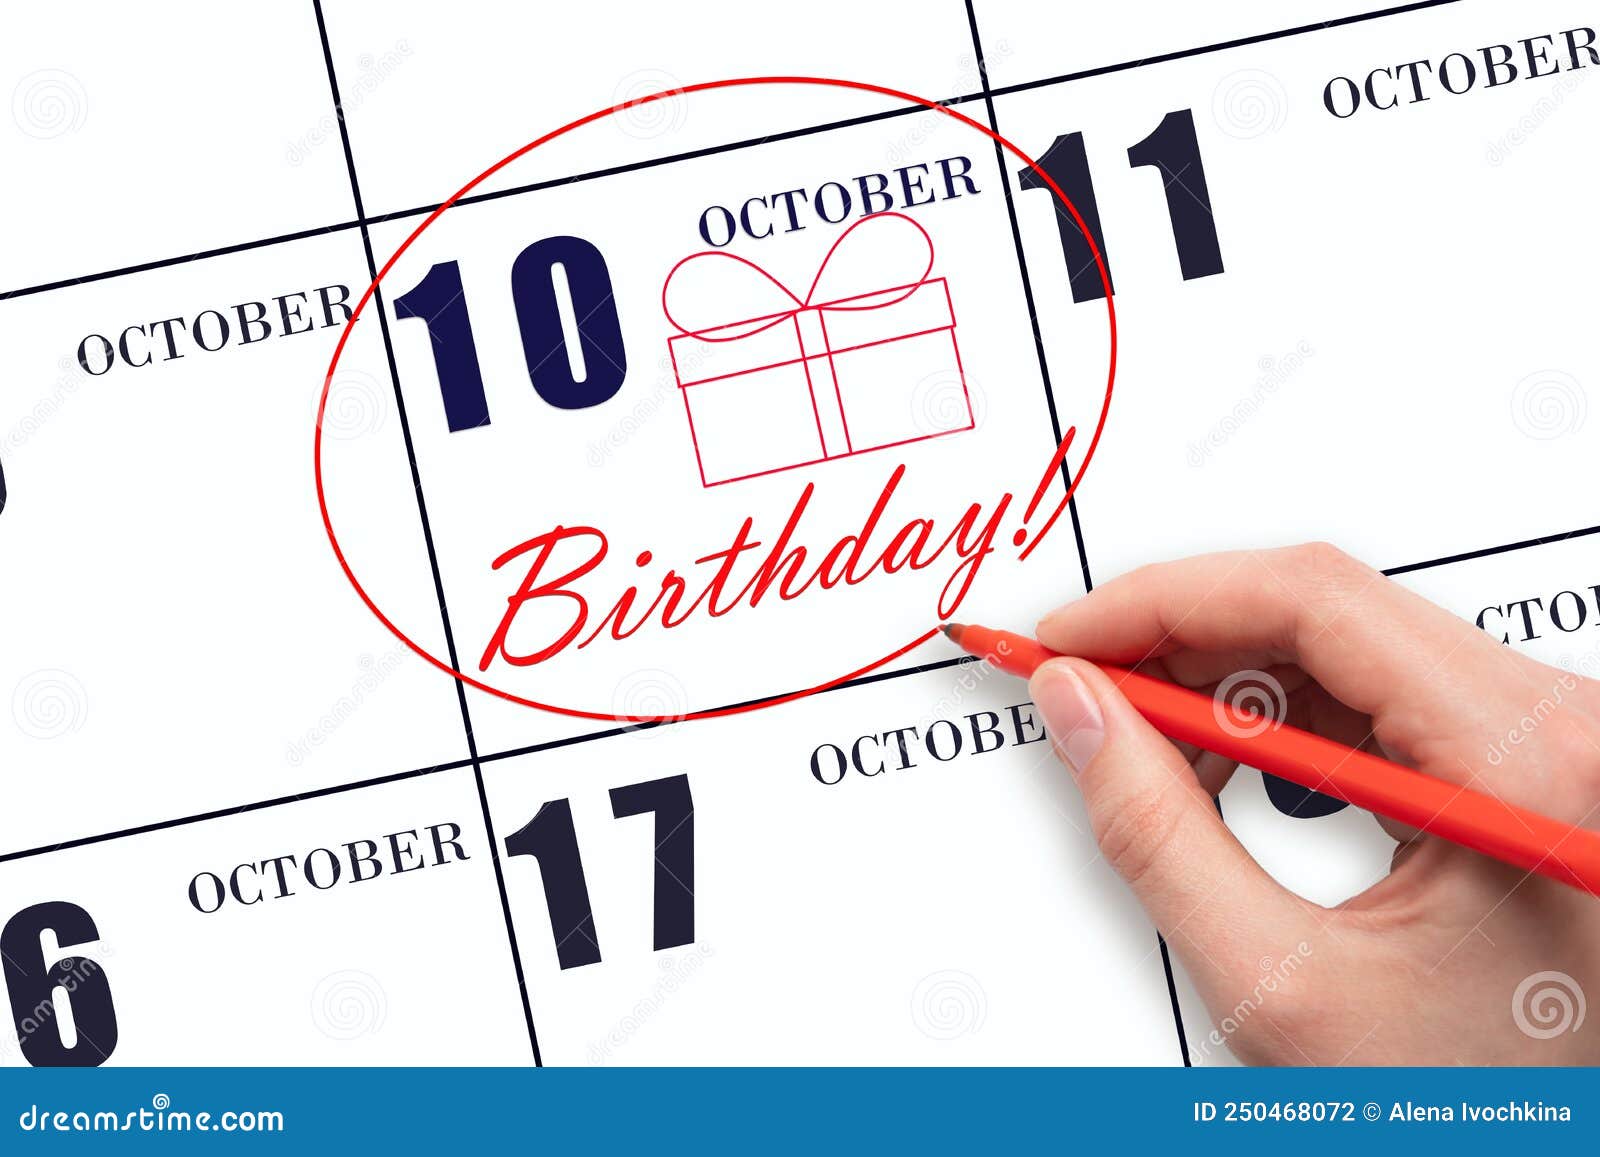 The Hand Circles the Date on the Calendar 10 October, Draws a Gift Box and Writes the Text Birthday. Holiday Stock Photo - Image of anniversary, family: 250468072